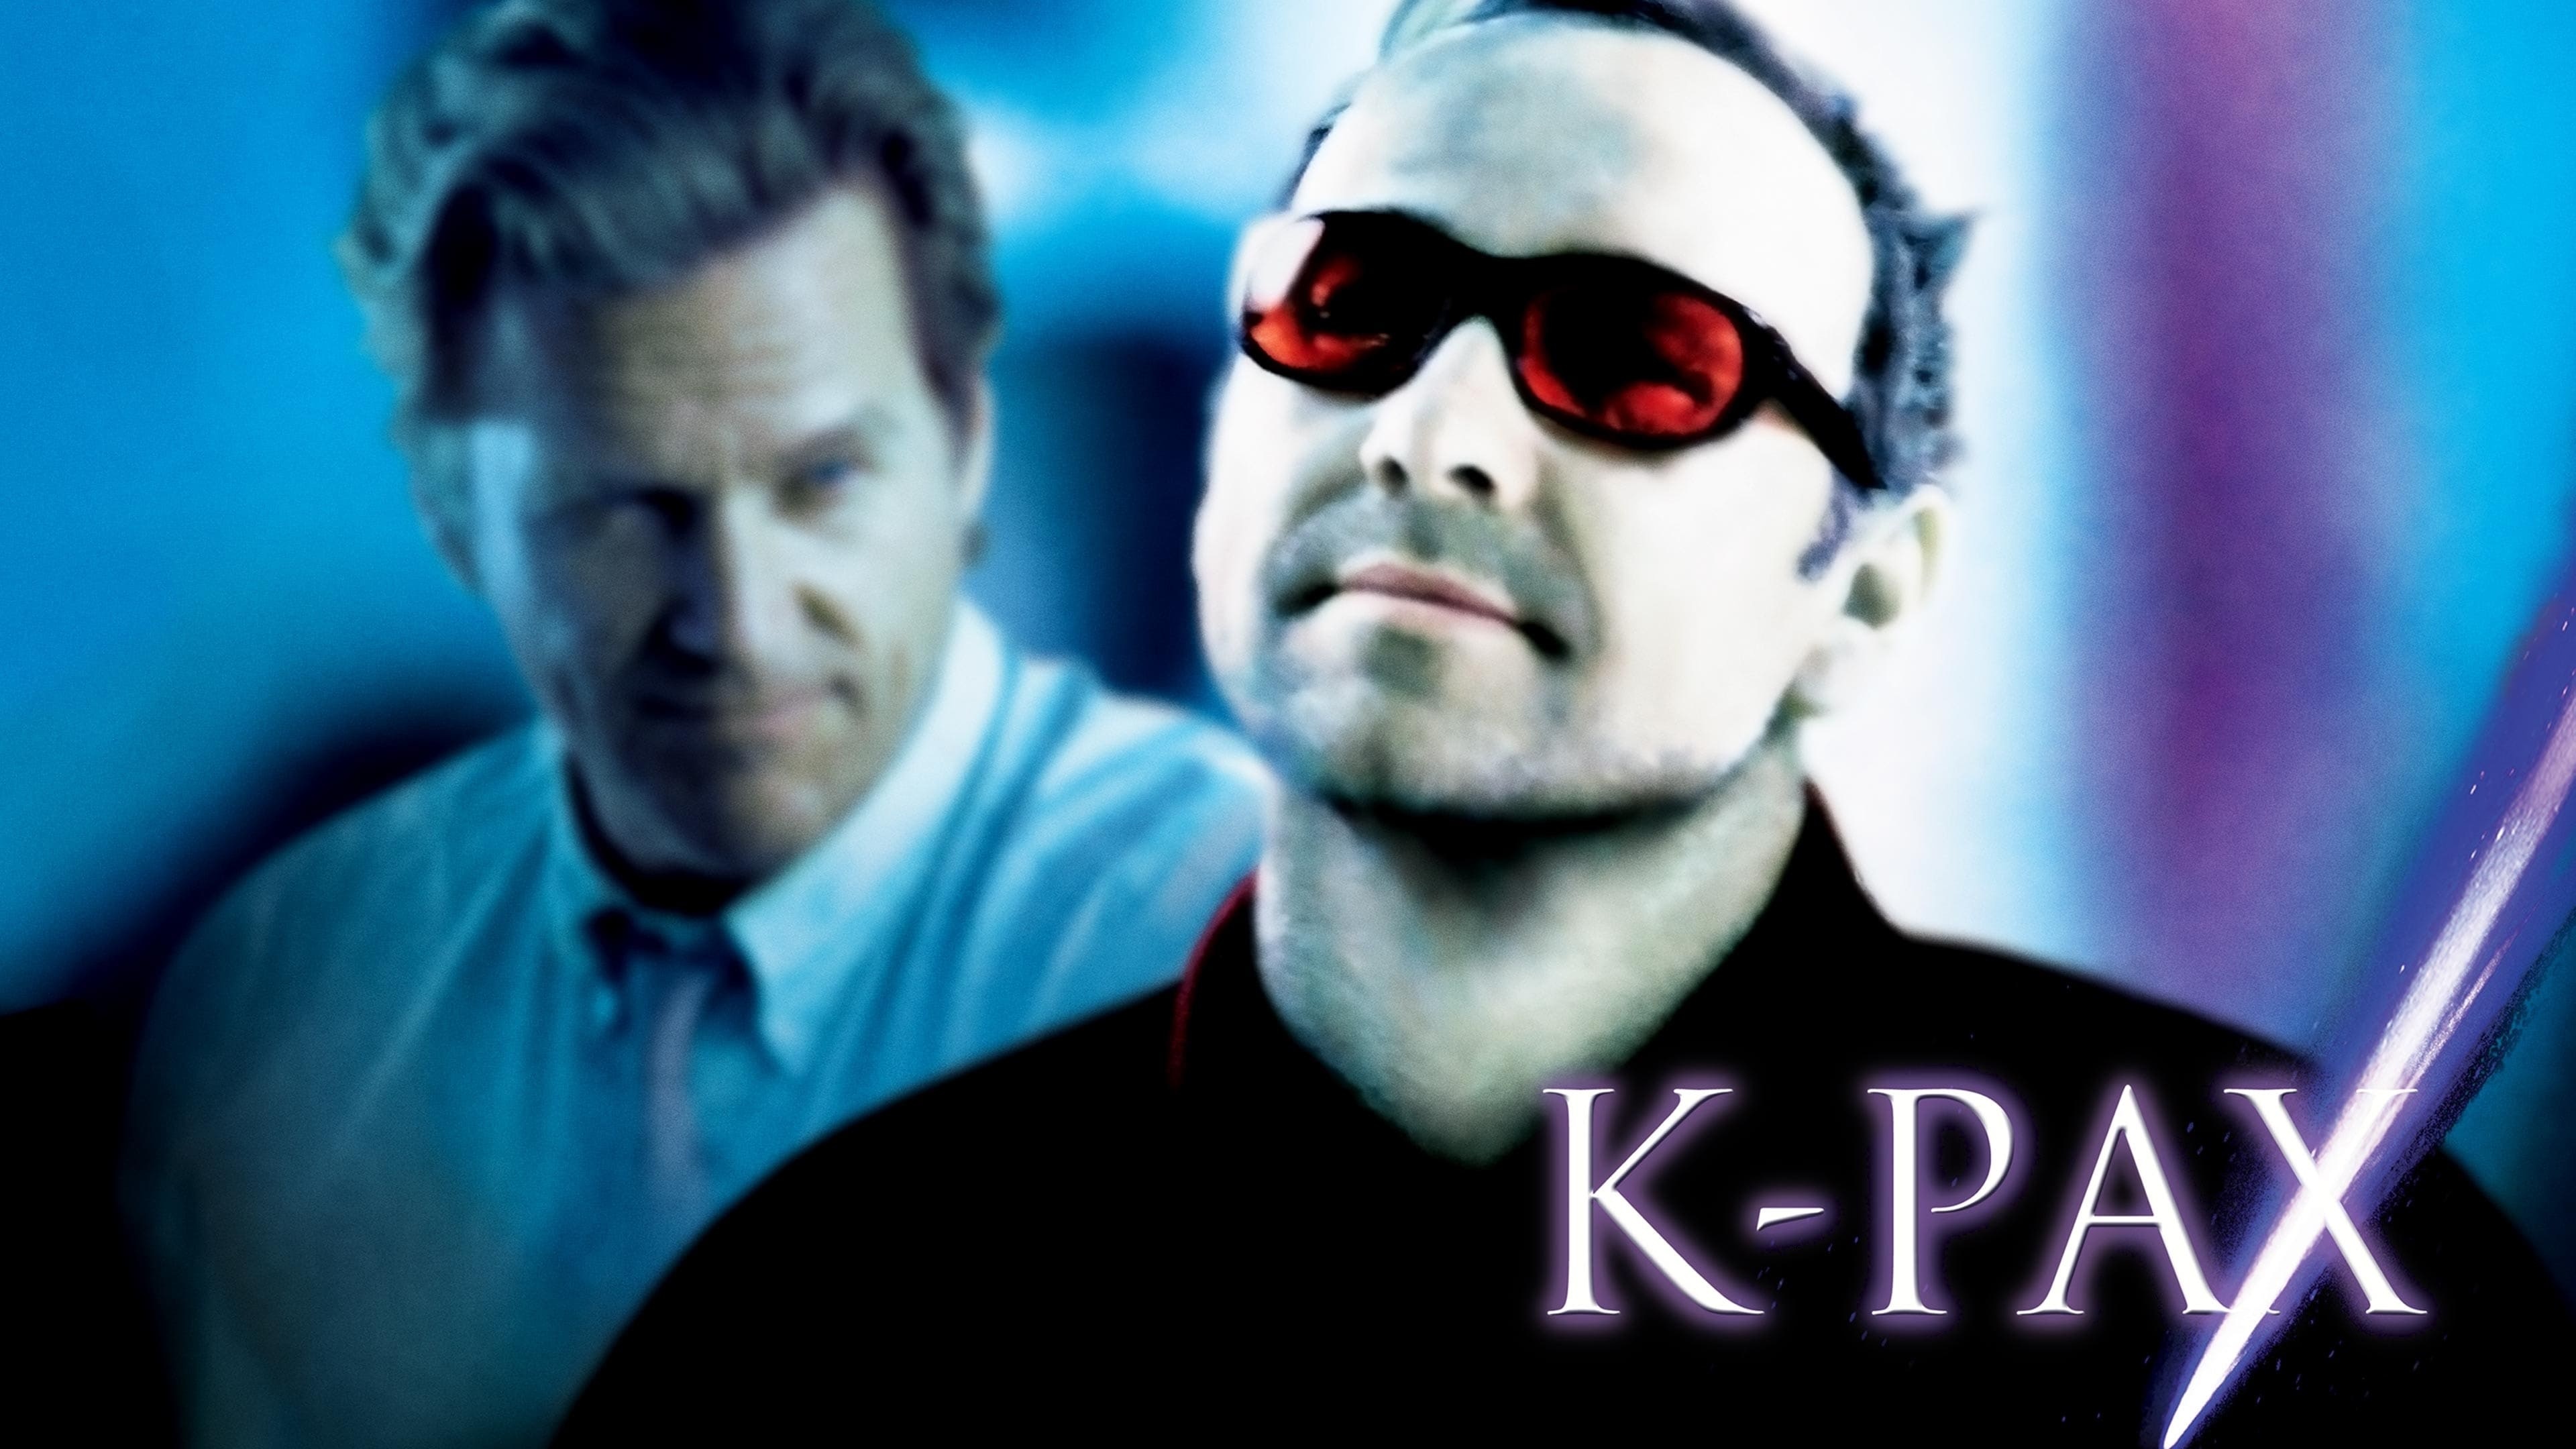 K-PAX movie database, Comprehensive film information, Detailed cast and crew, Curated content, 3840x2160 4K Desktop